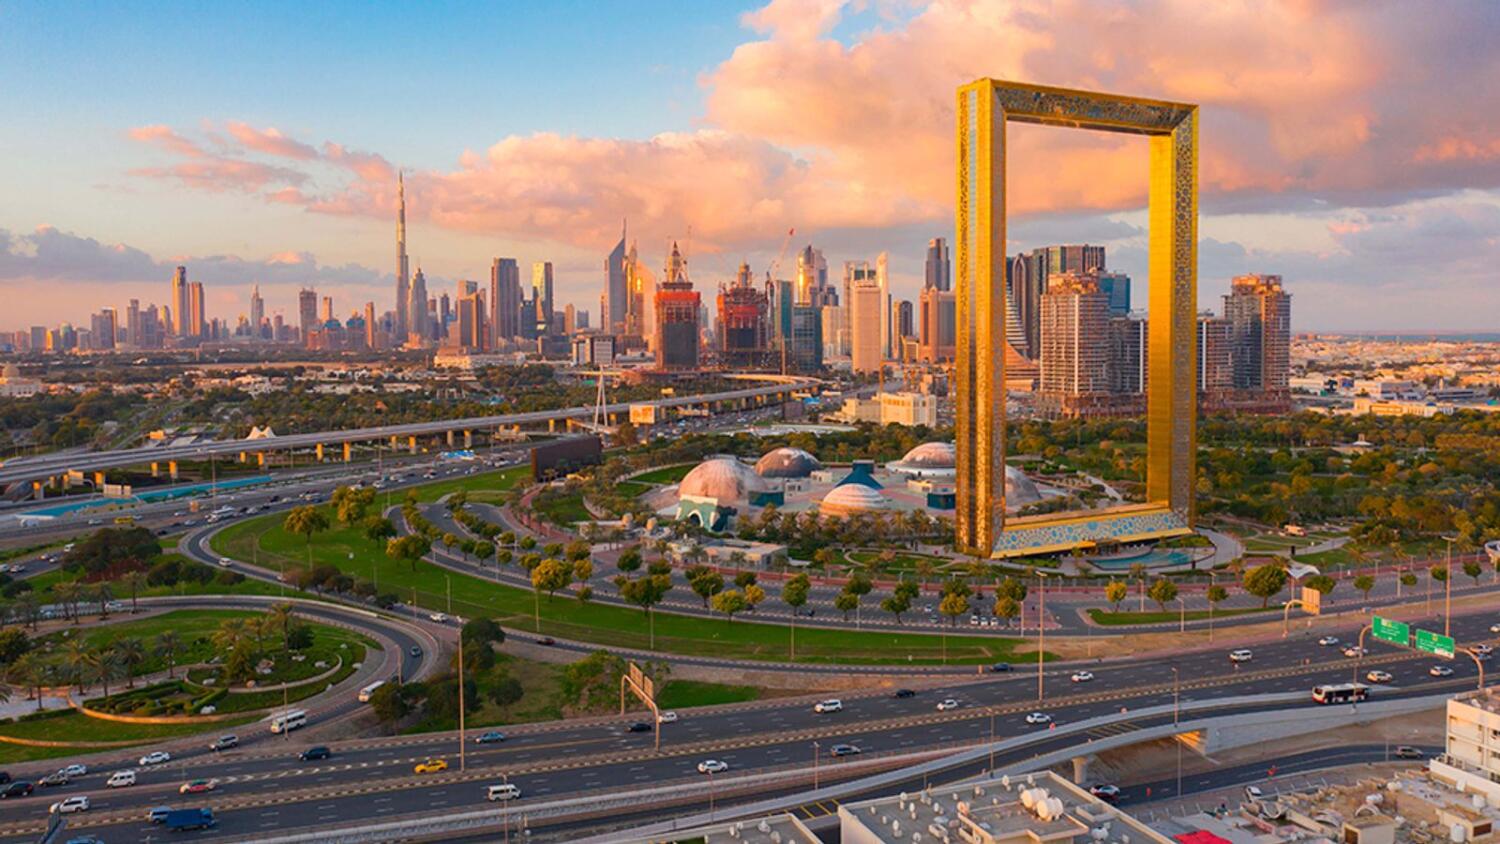 Top 15 Tourism place in Dubai and UAE